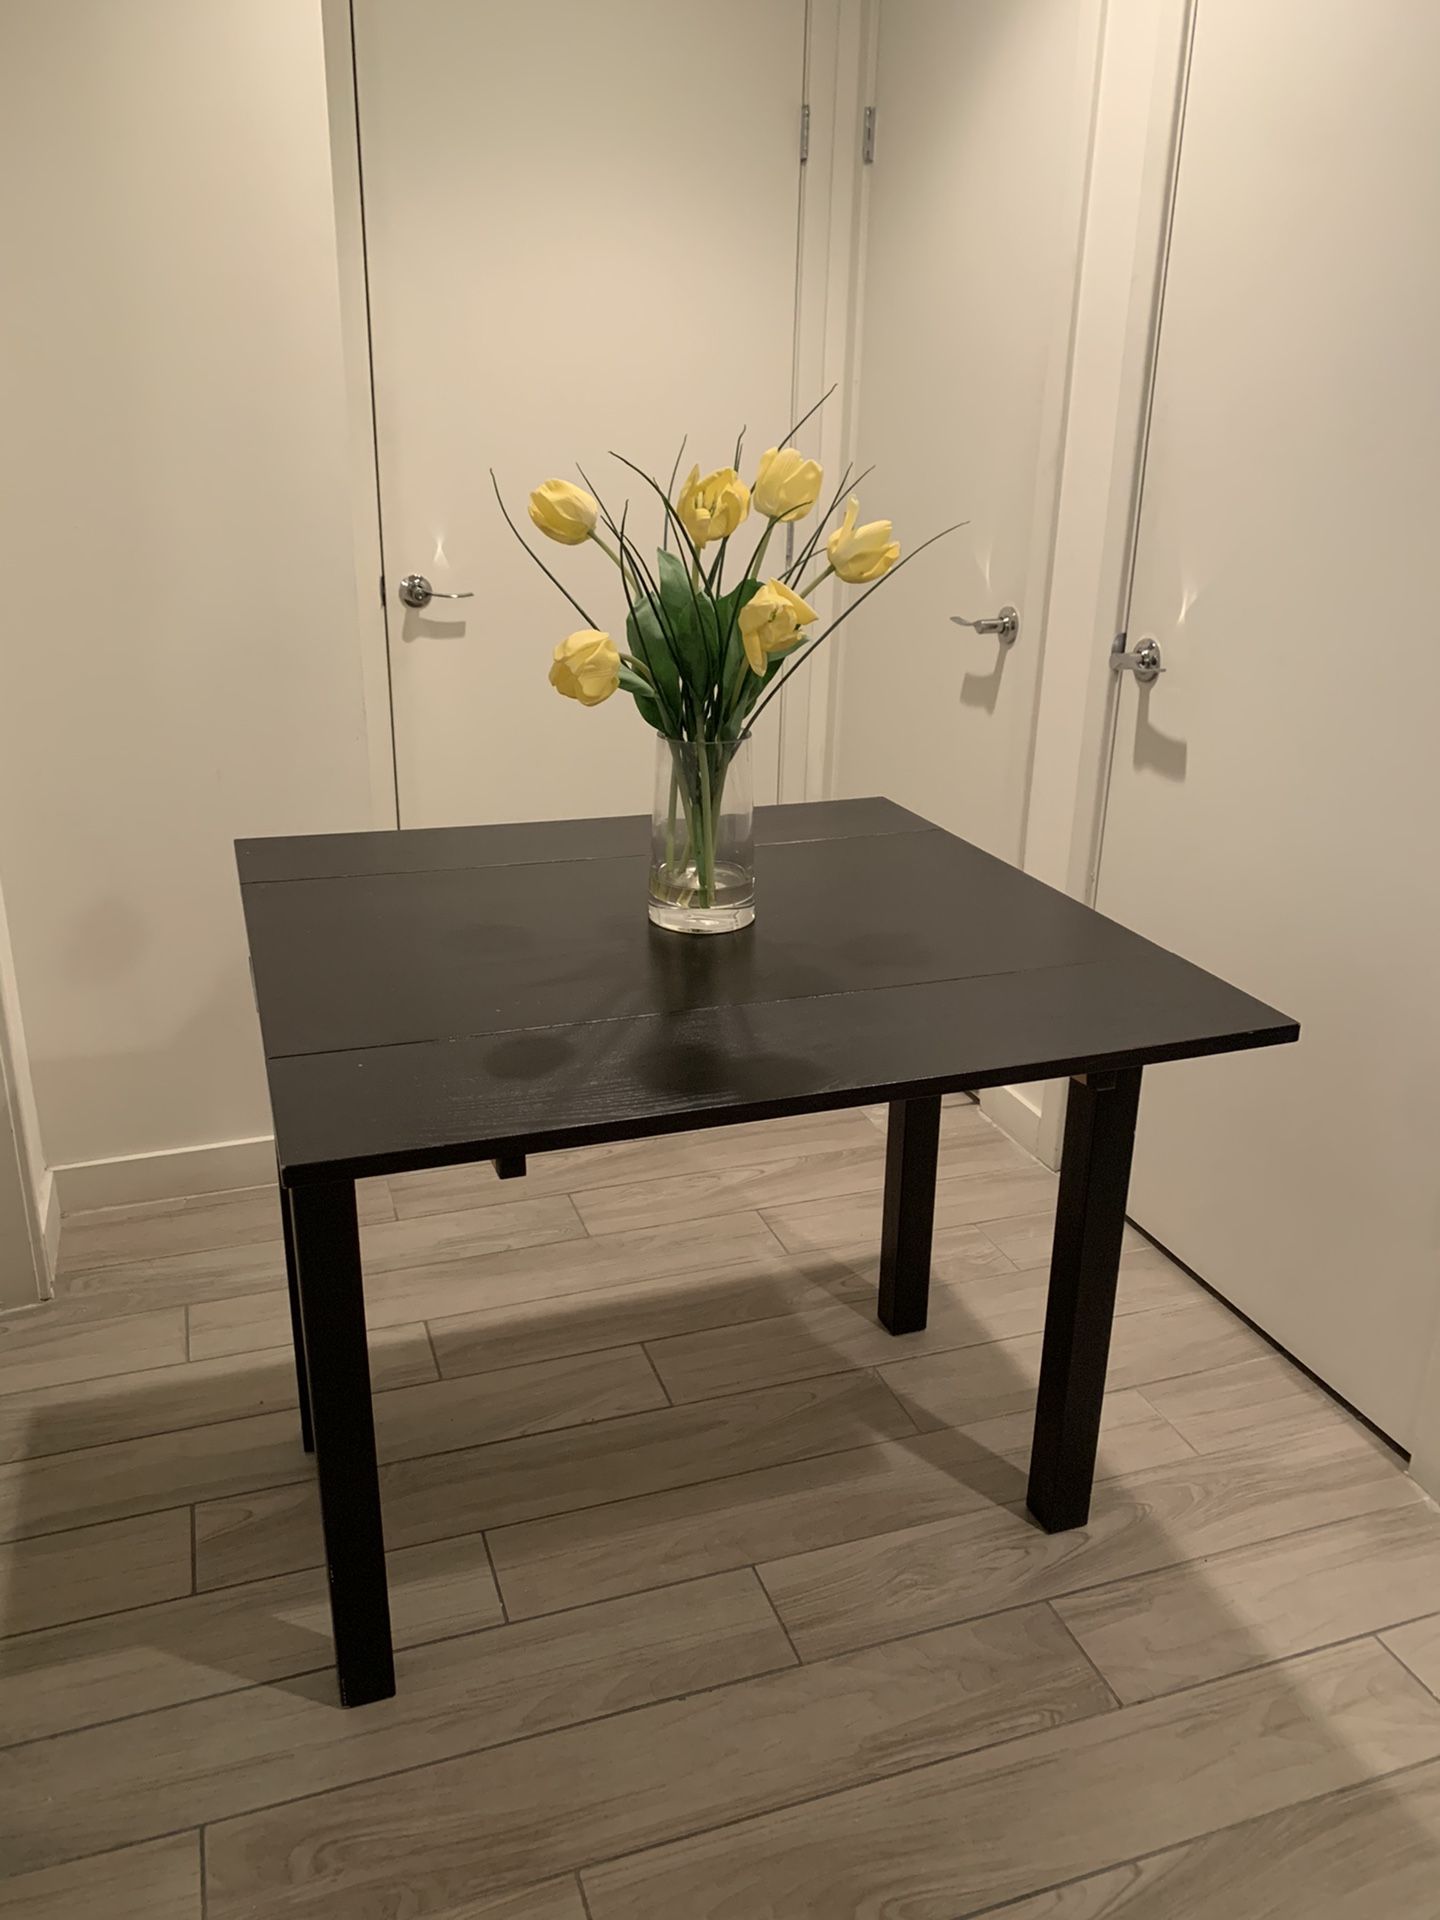 Expandable Table - 35” x 35” Extended; 35” x 19.5” Closed